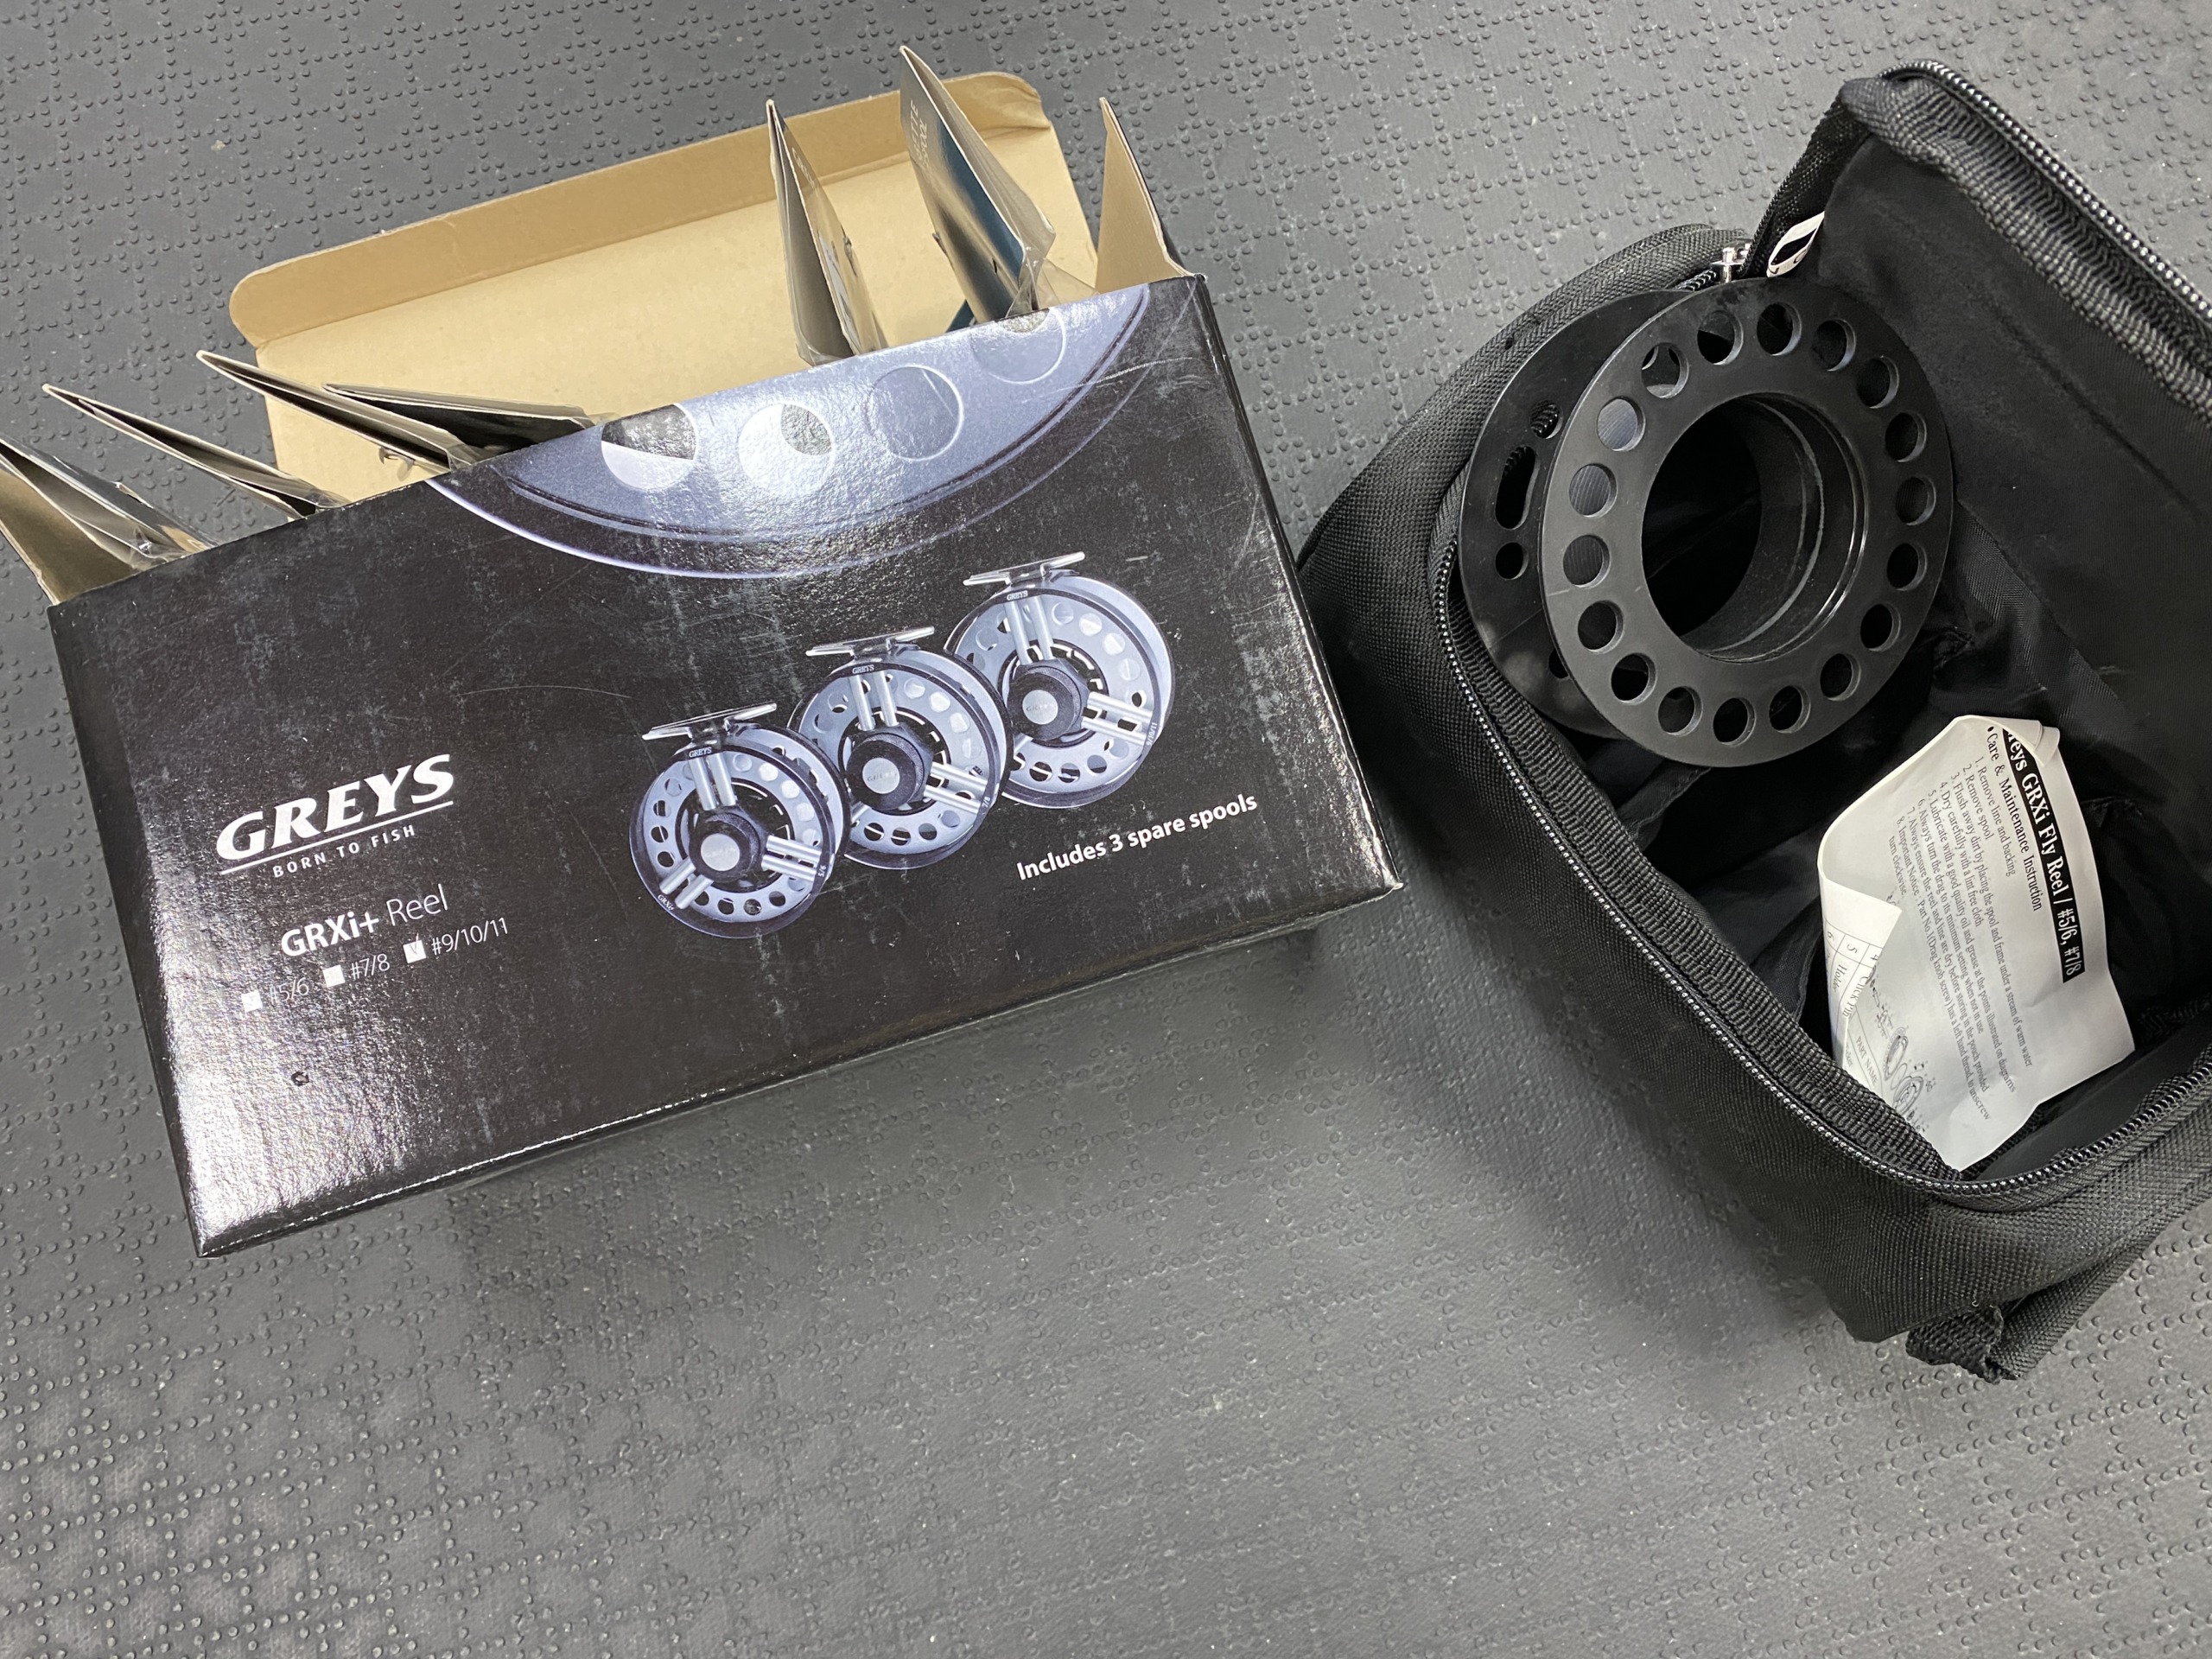 Greys GRXi+ Fly Reel - #9/10/11 - SPOOLS ONLY! - SEVEN Spare Spools & Pouch - NEVER USED! - $50